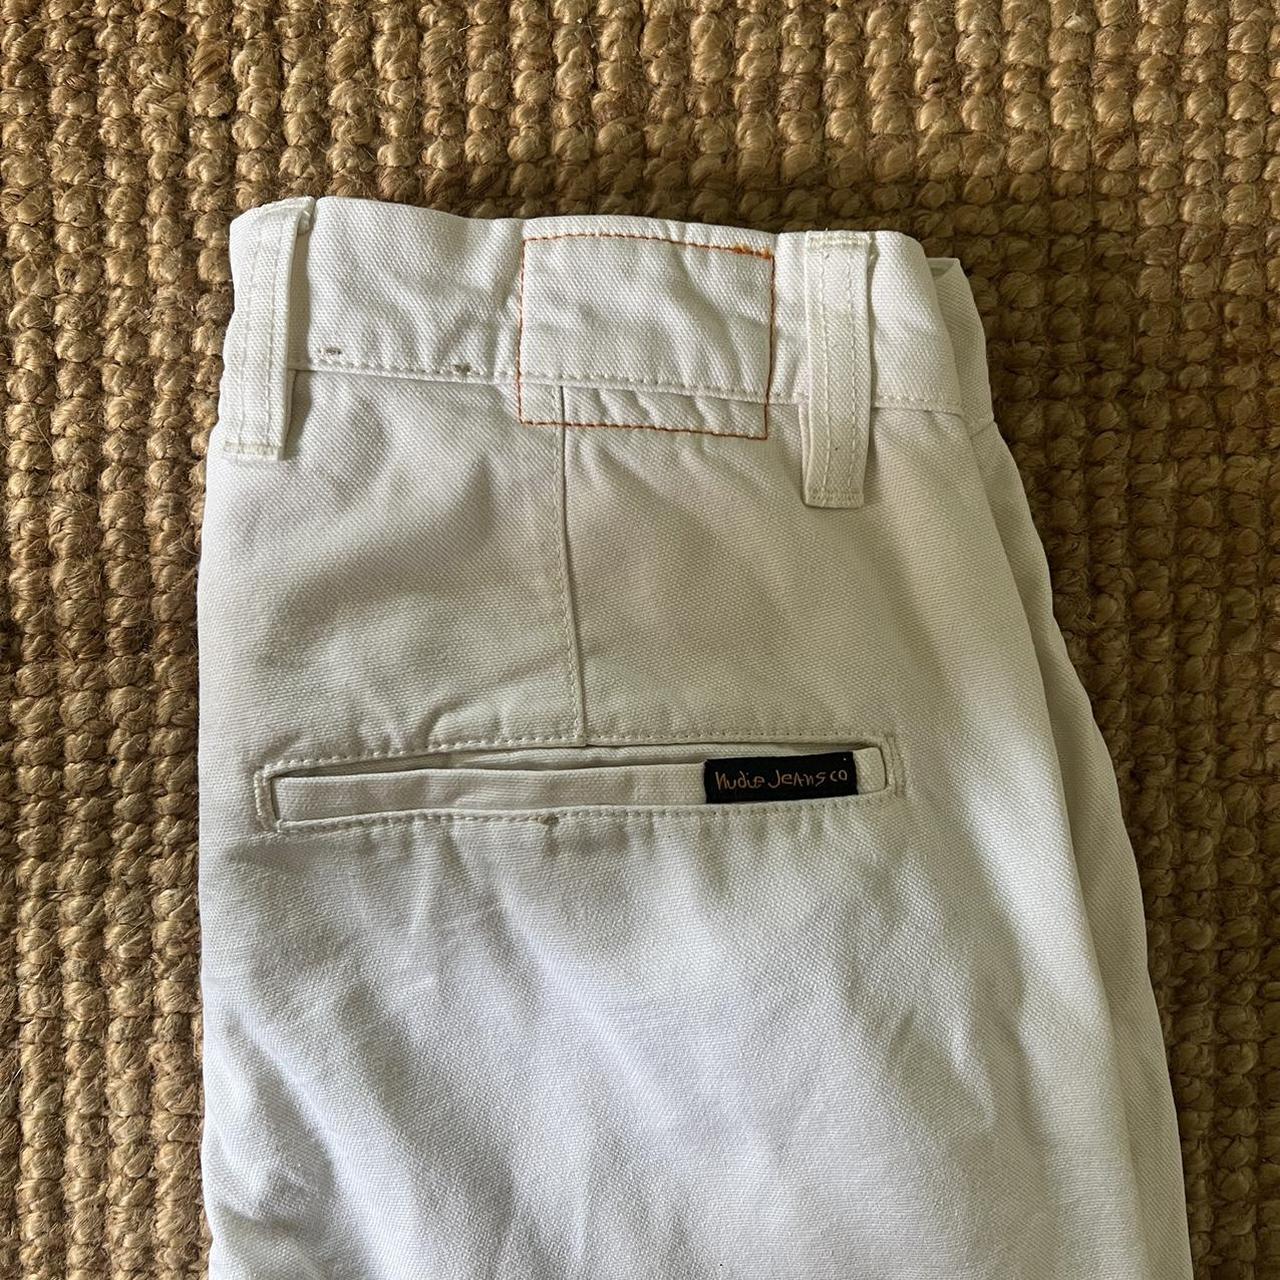 Nudie Jeans thick chino/skater pants in off... - Depop